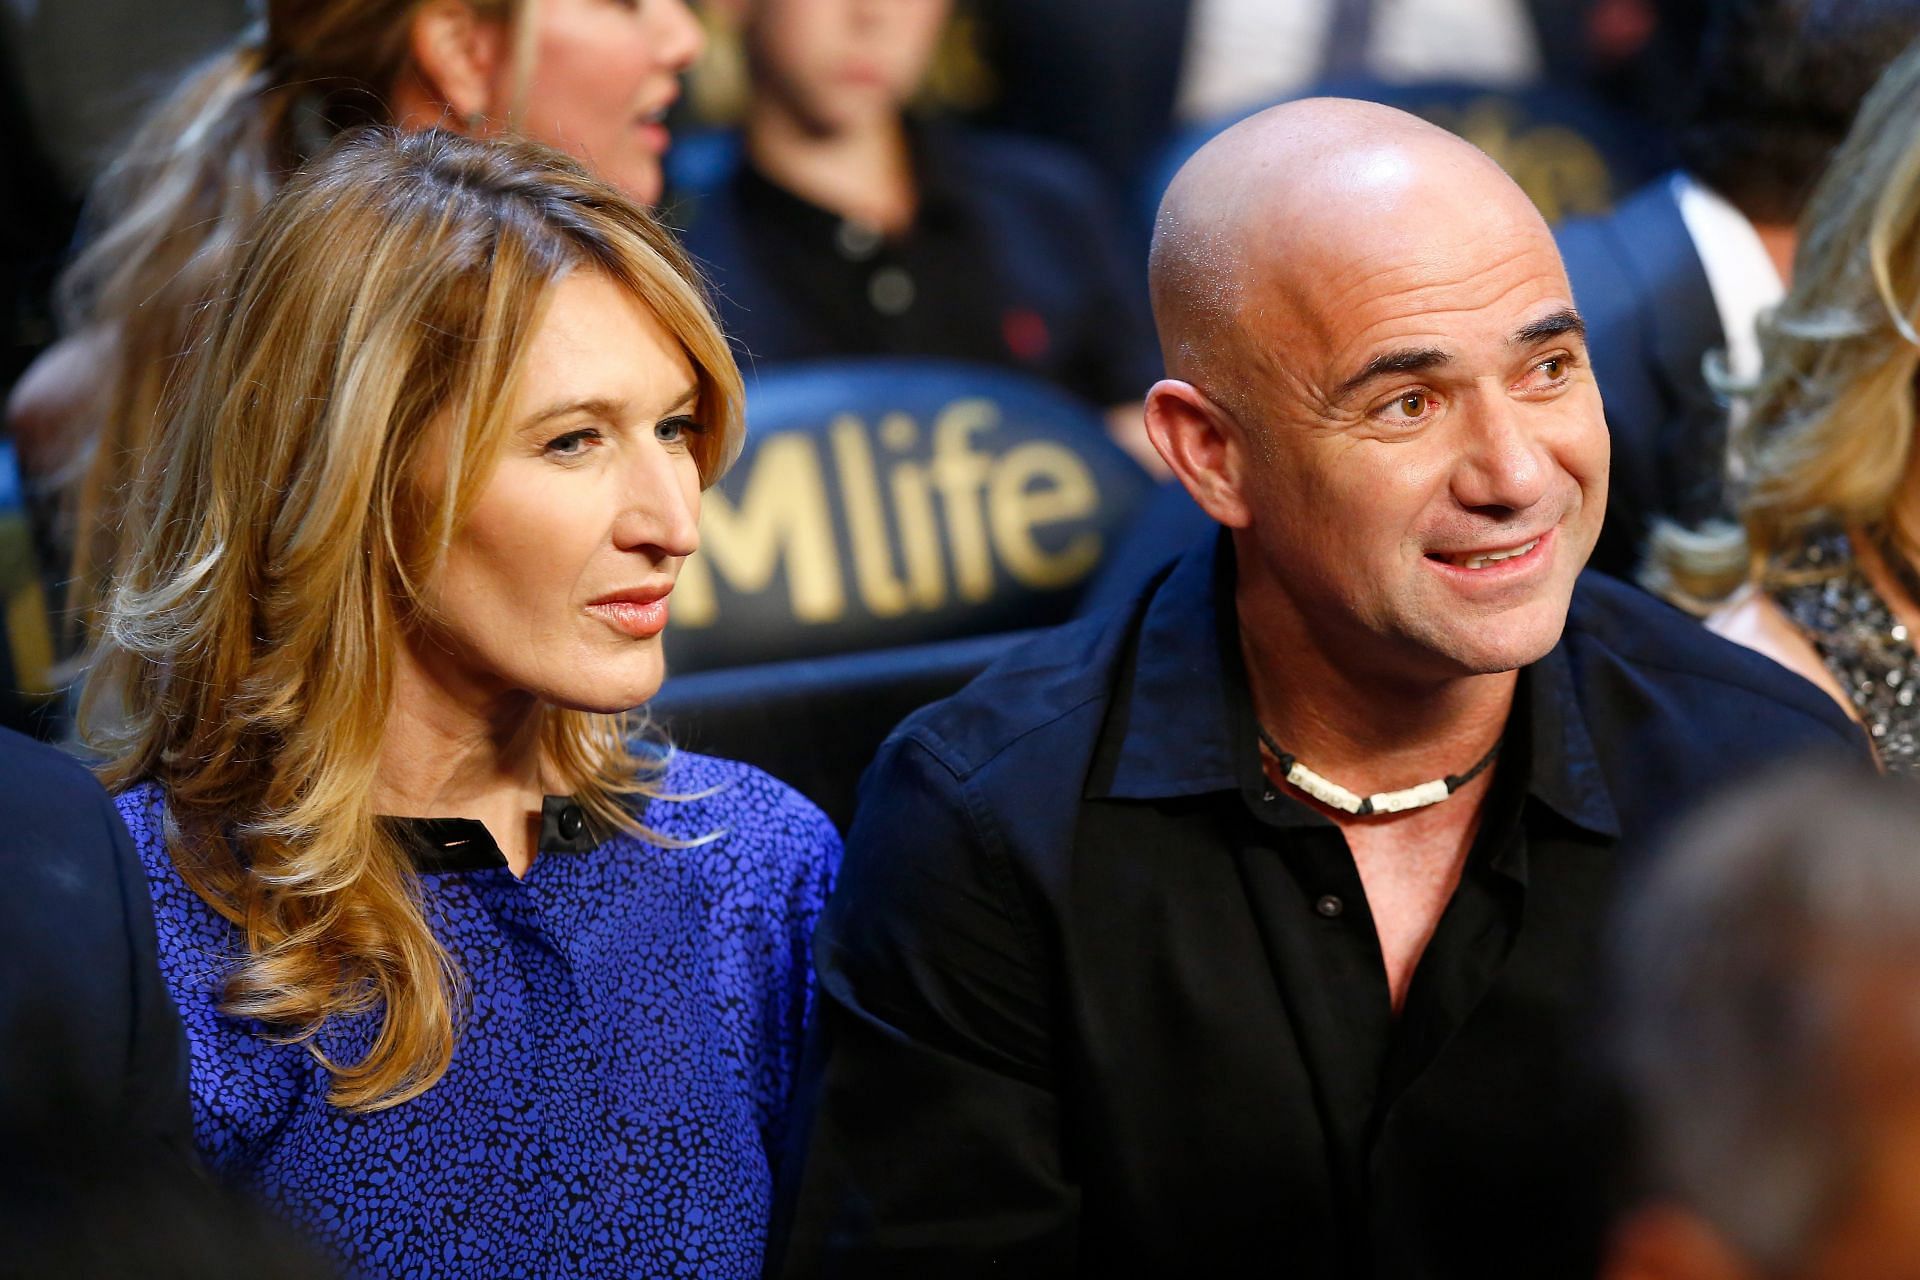 Steffi Graf (L) and Andre Agassi (R) attending a boxing match at MGM Grand Garden Arena in 2015